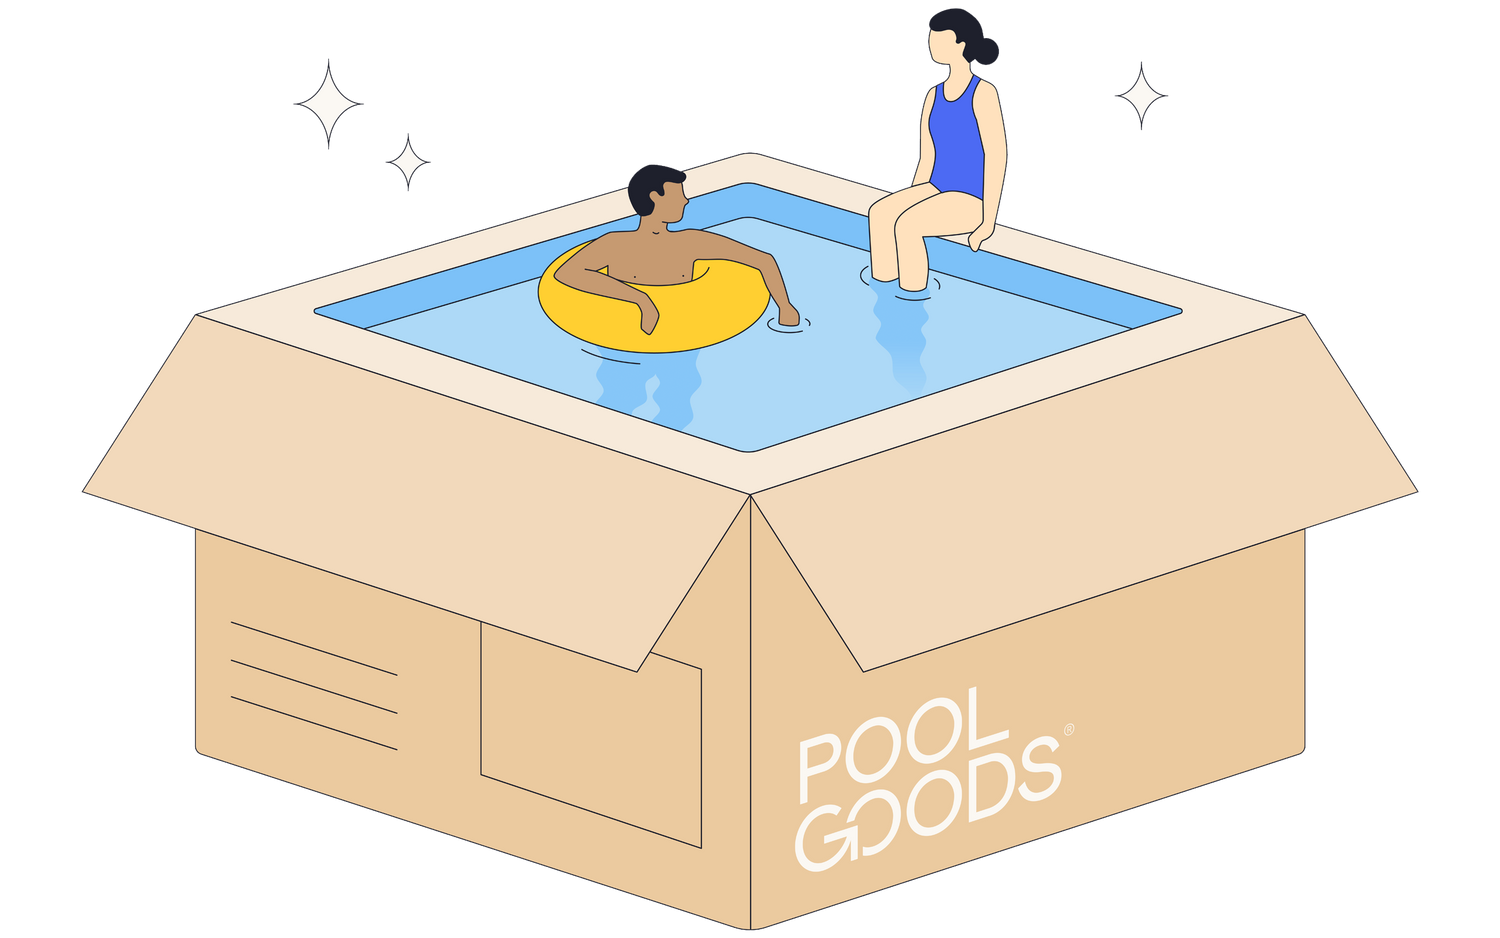 Pool Goods is an e-commerce pool product and spa product store based in Greenville, SC.